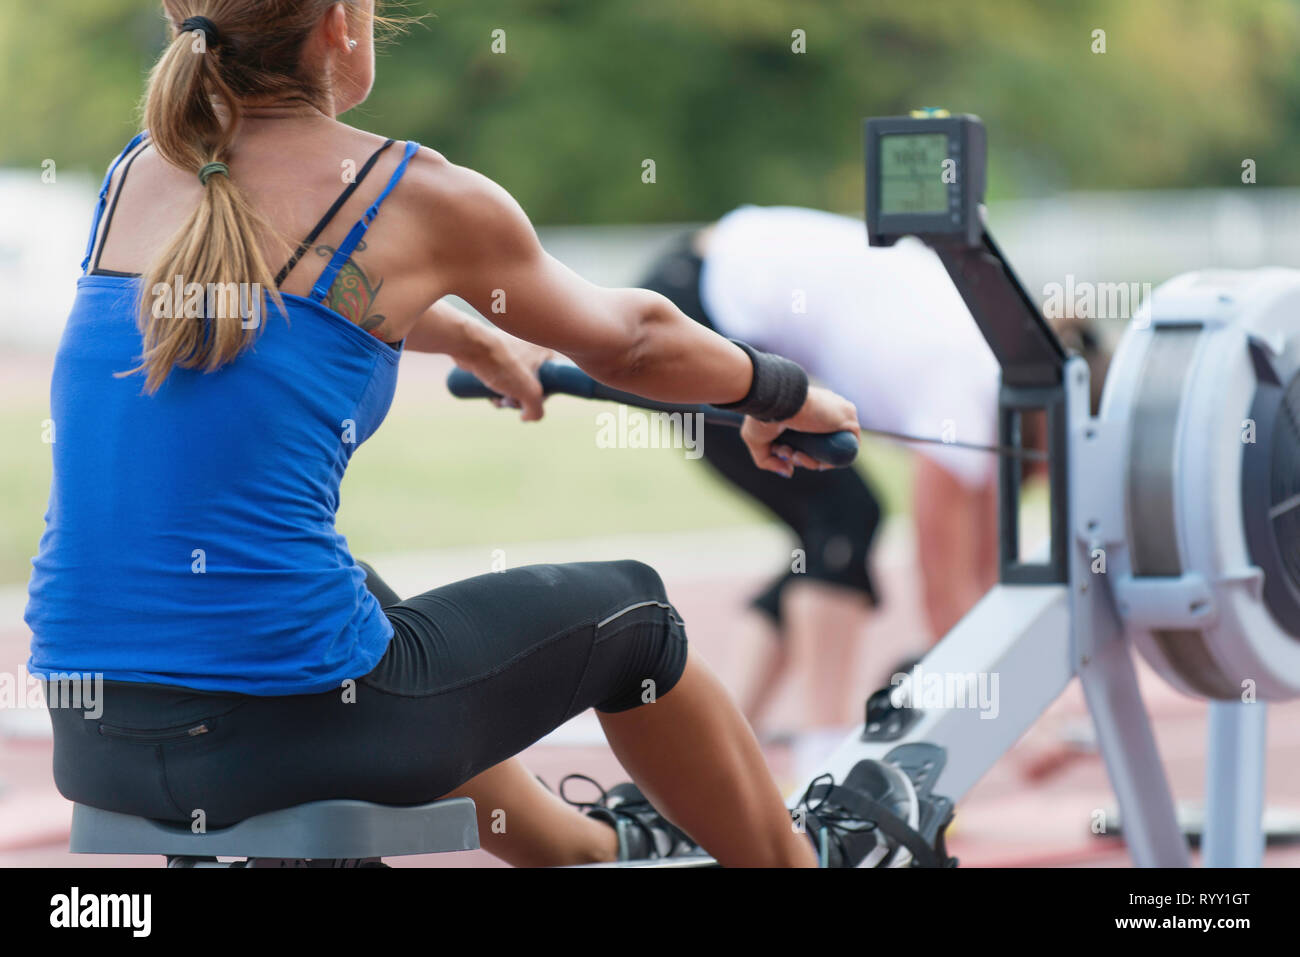 Rowing machine competition. Stock Photo